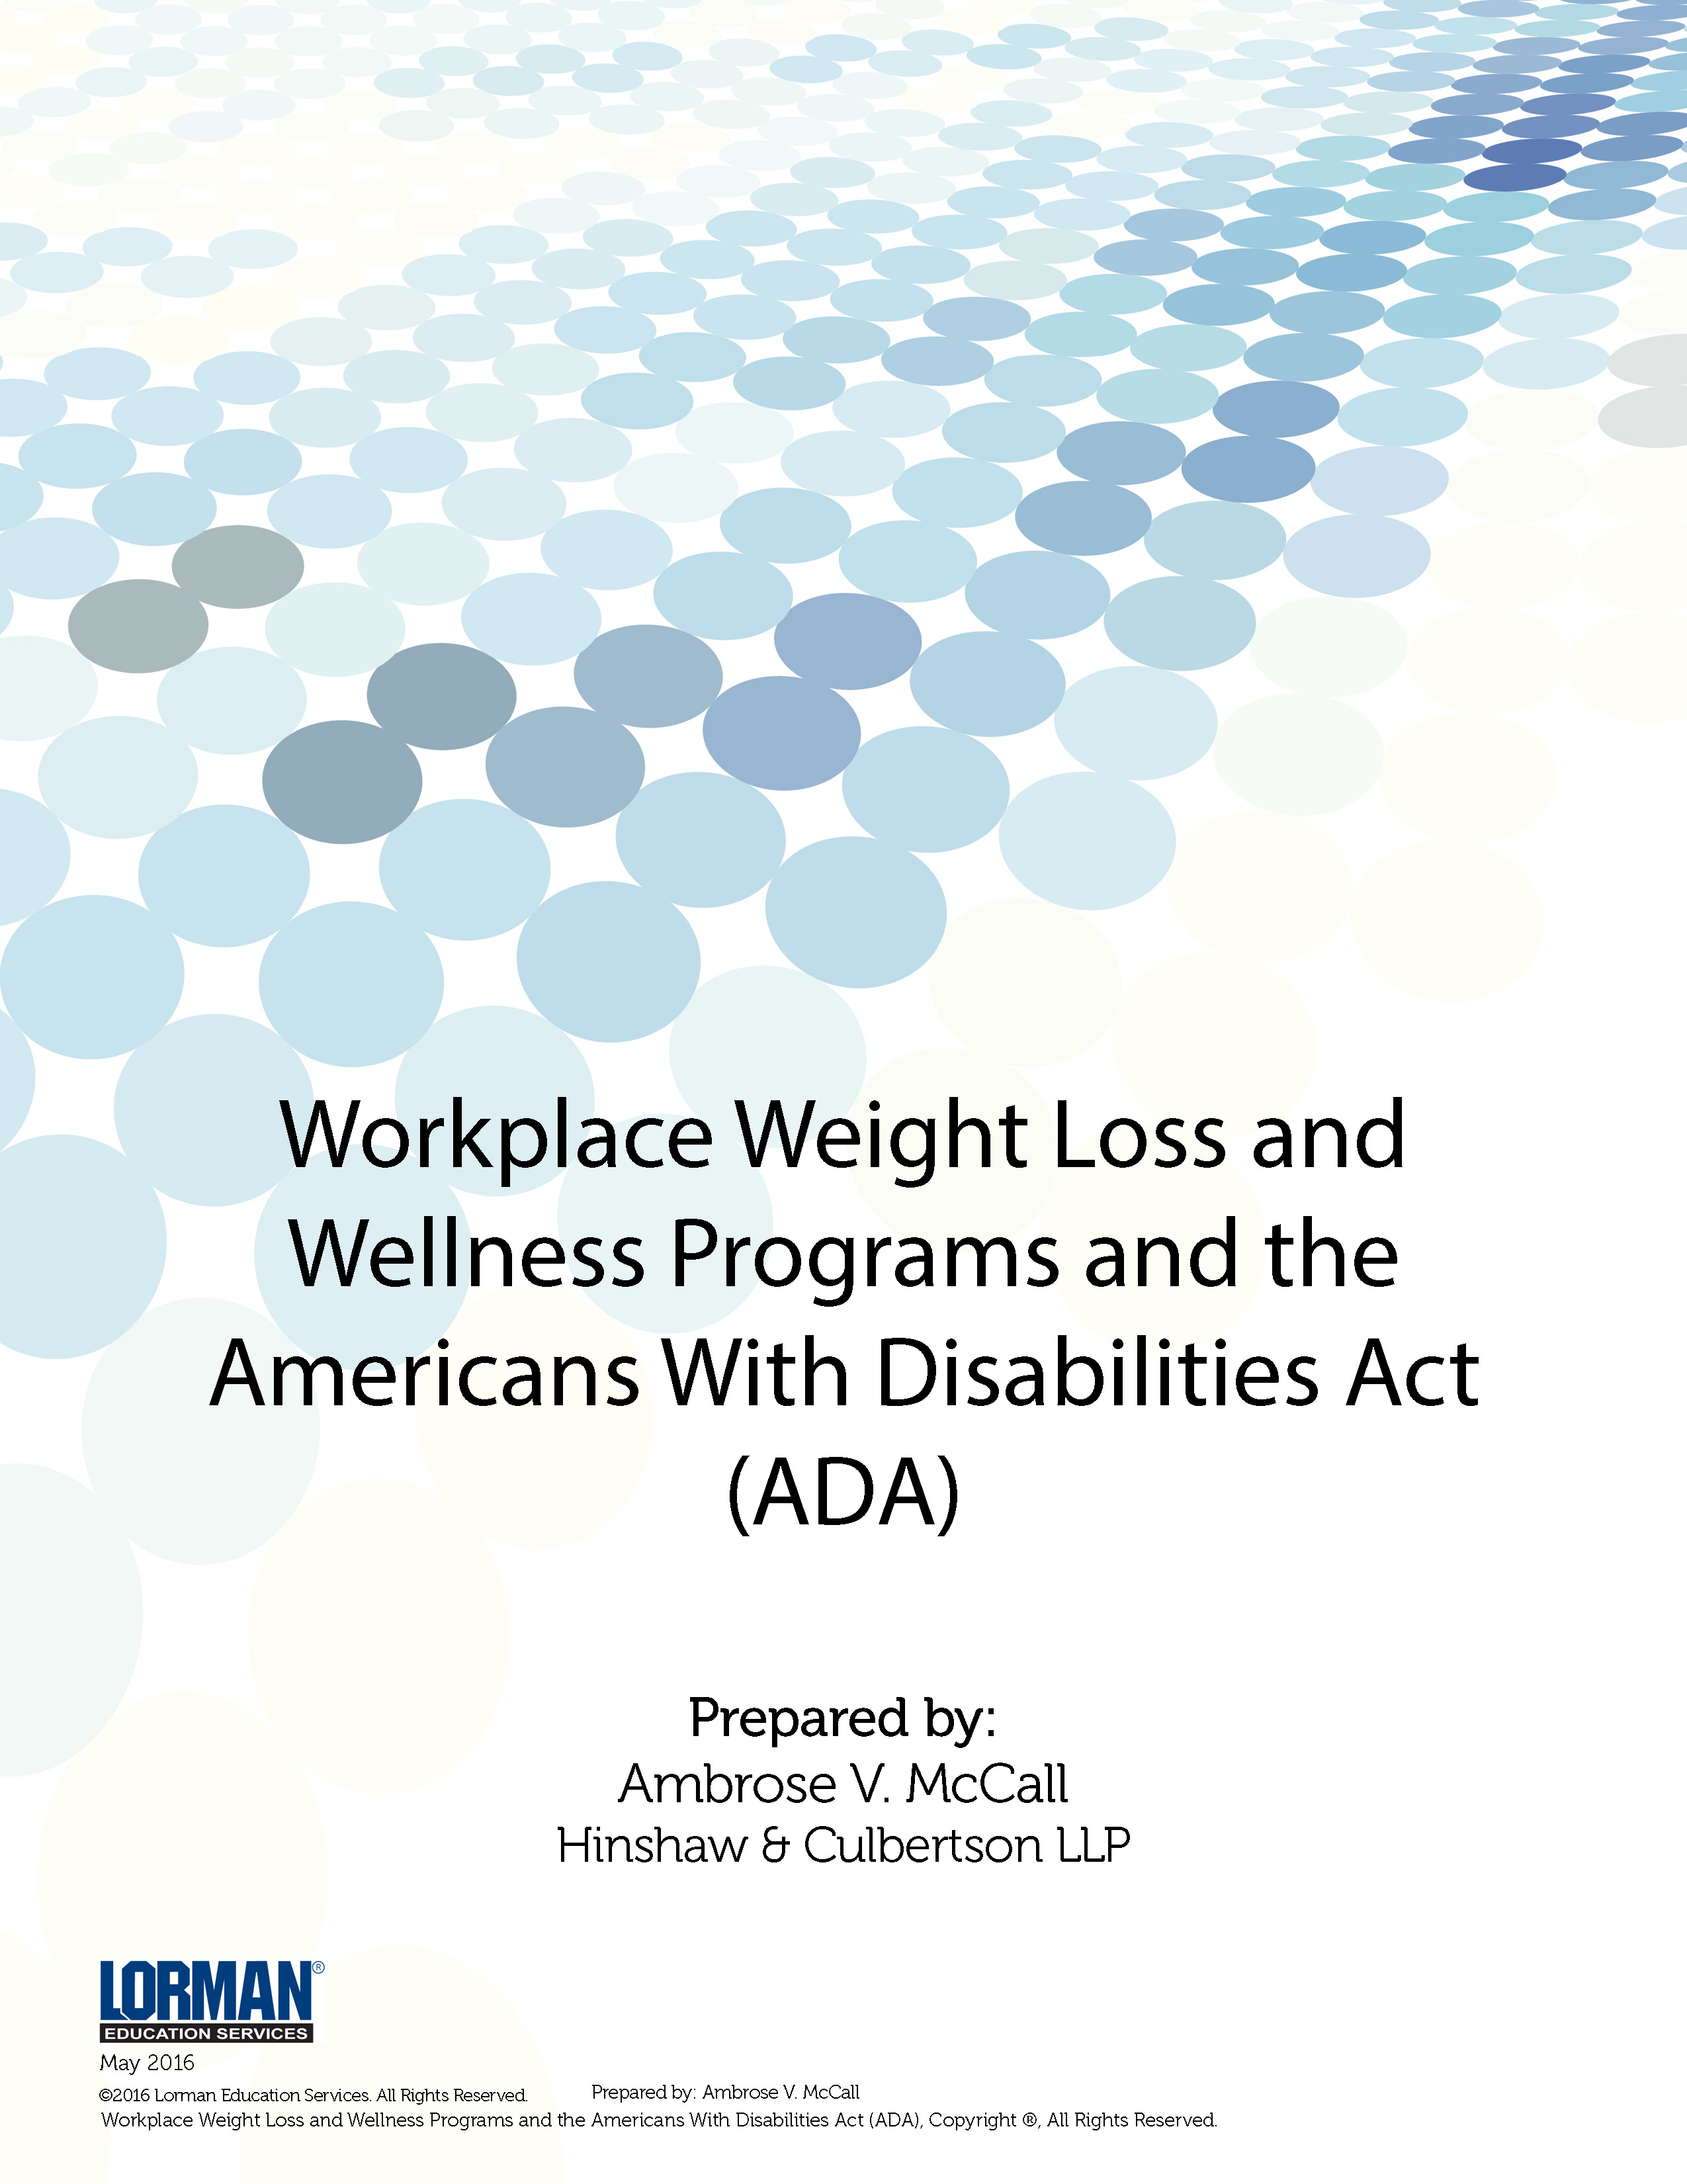 Workplace Weight Loss and Wellness Programs and the Americans With Disabilities Act (ADA)